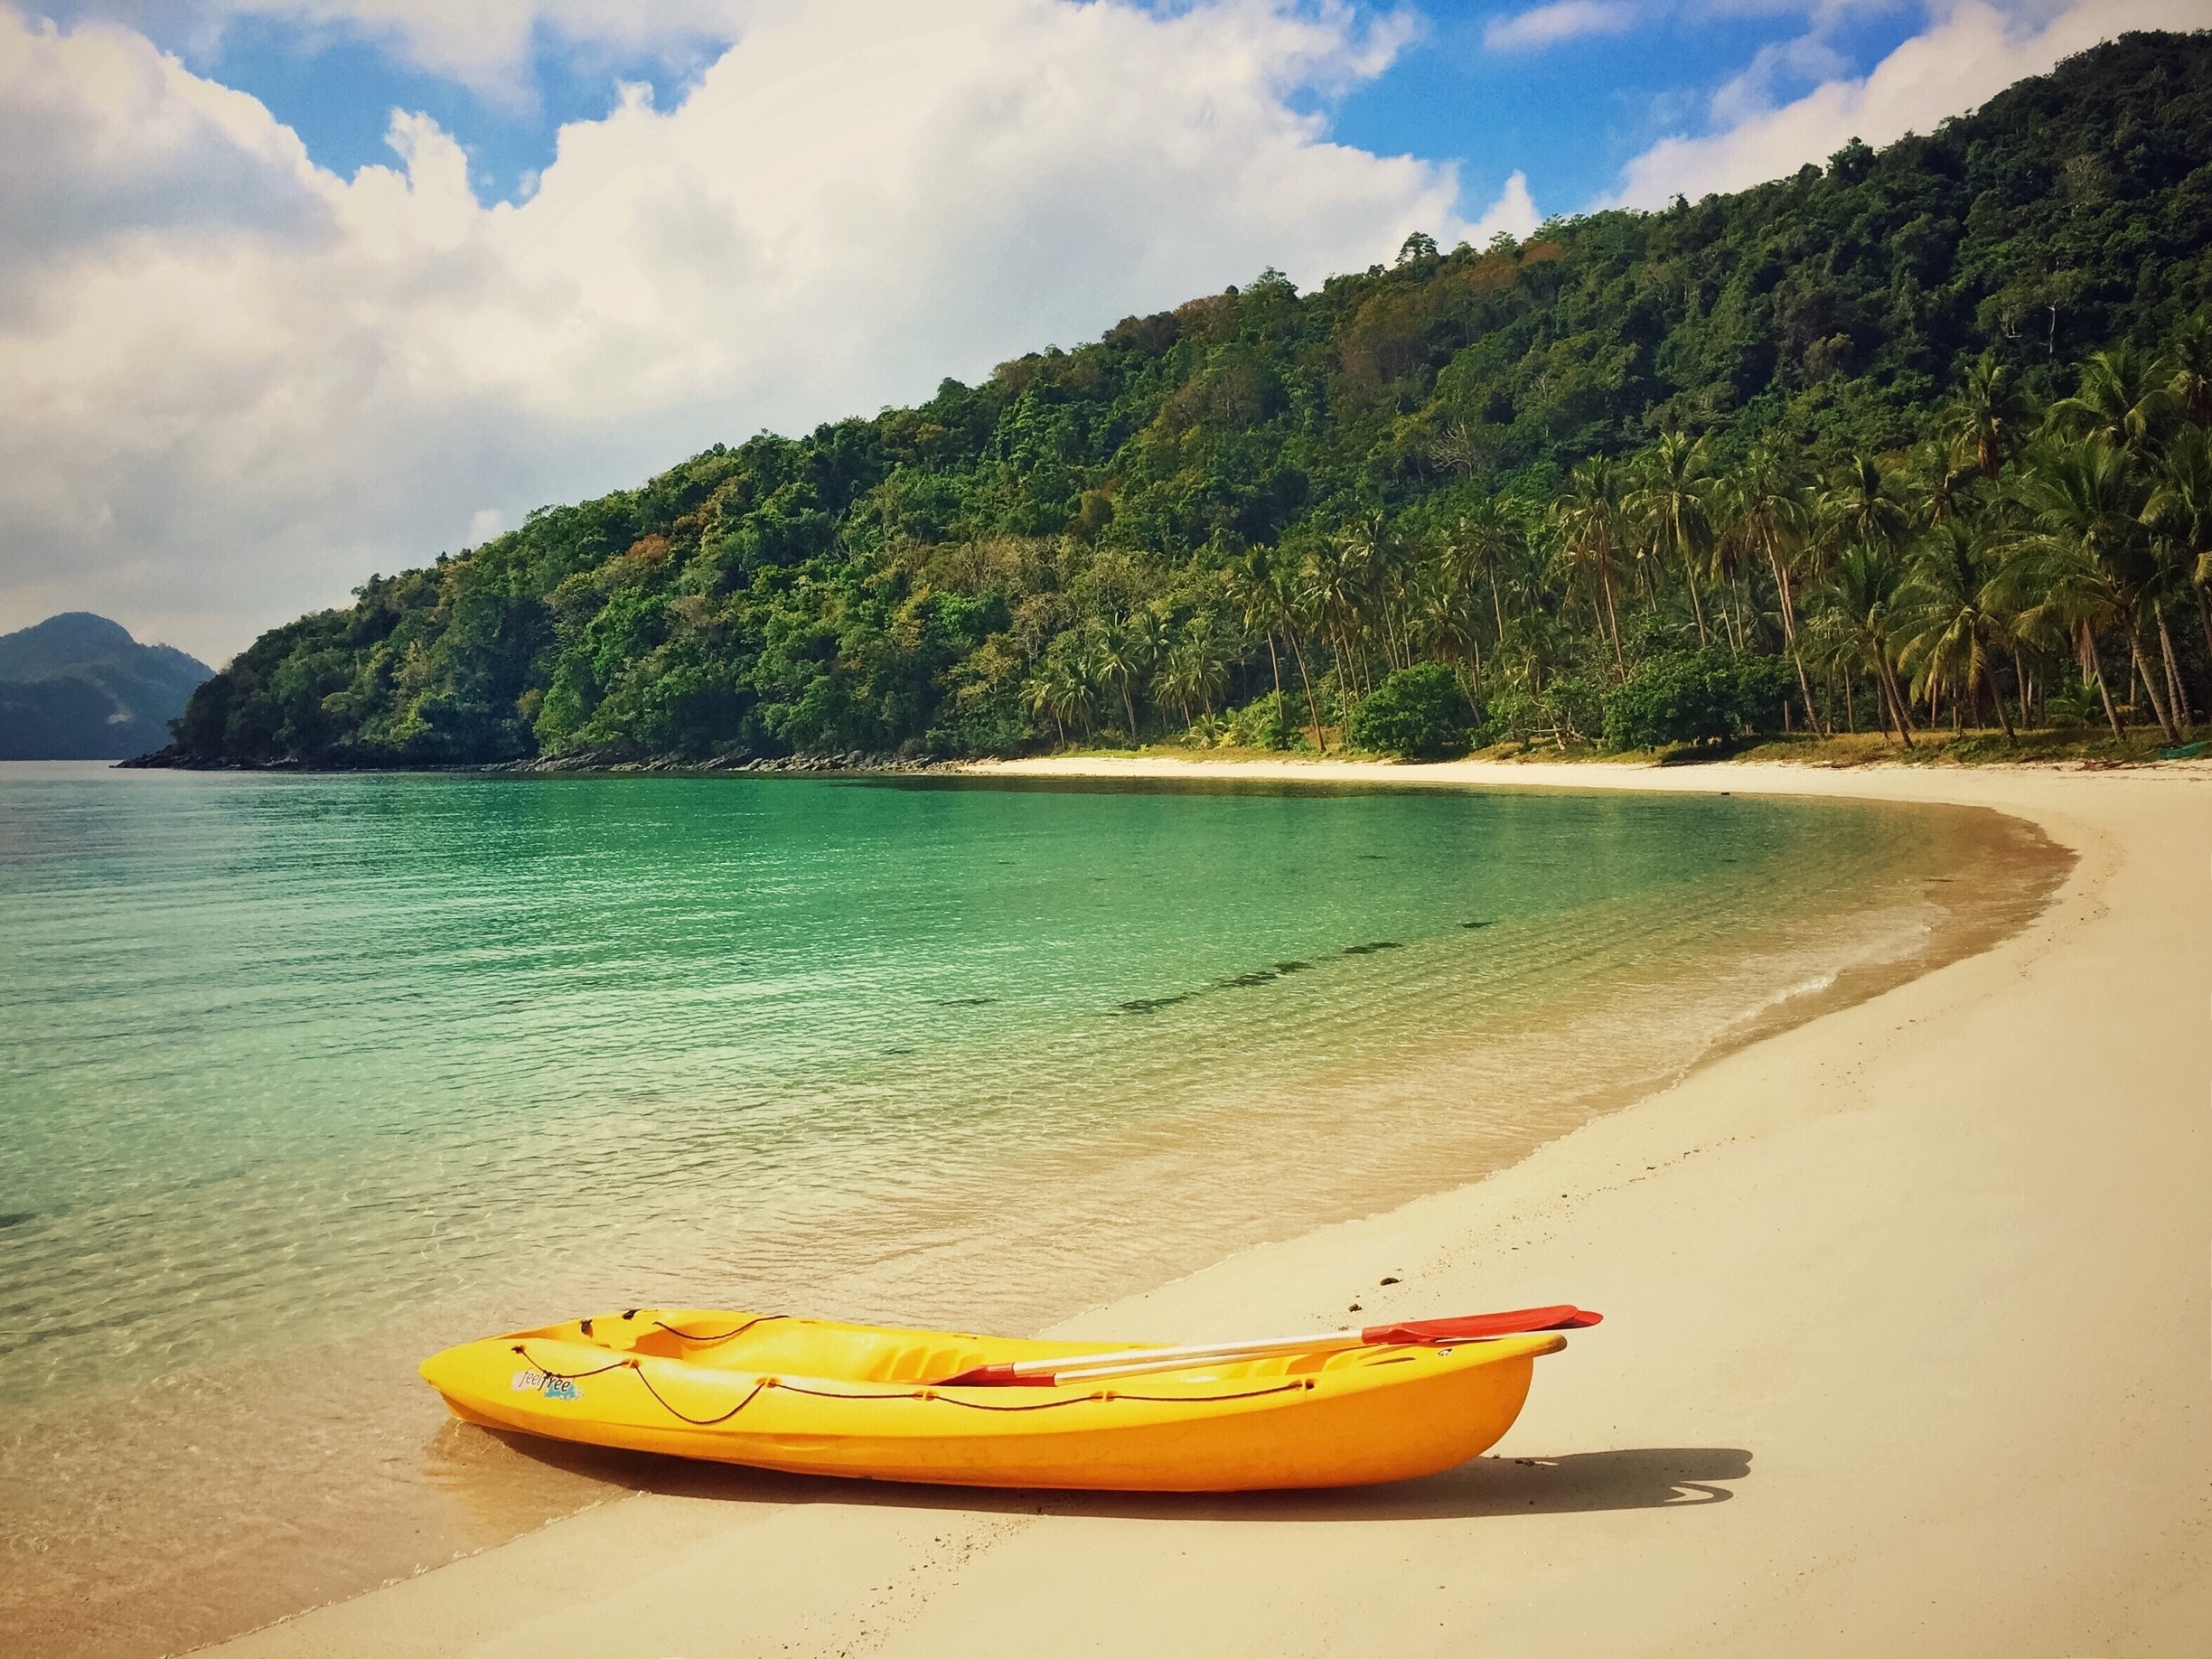 By kayak we found our way to this perfect, secluded beach off the coast of Port Barton in the Philippines #BeachBound #thephilippines #asia